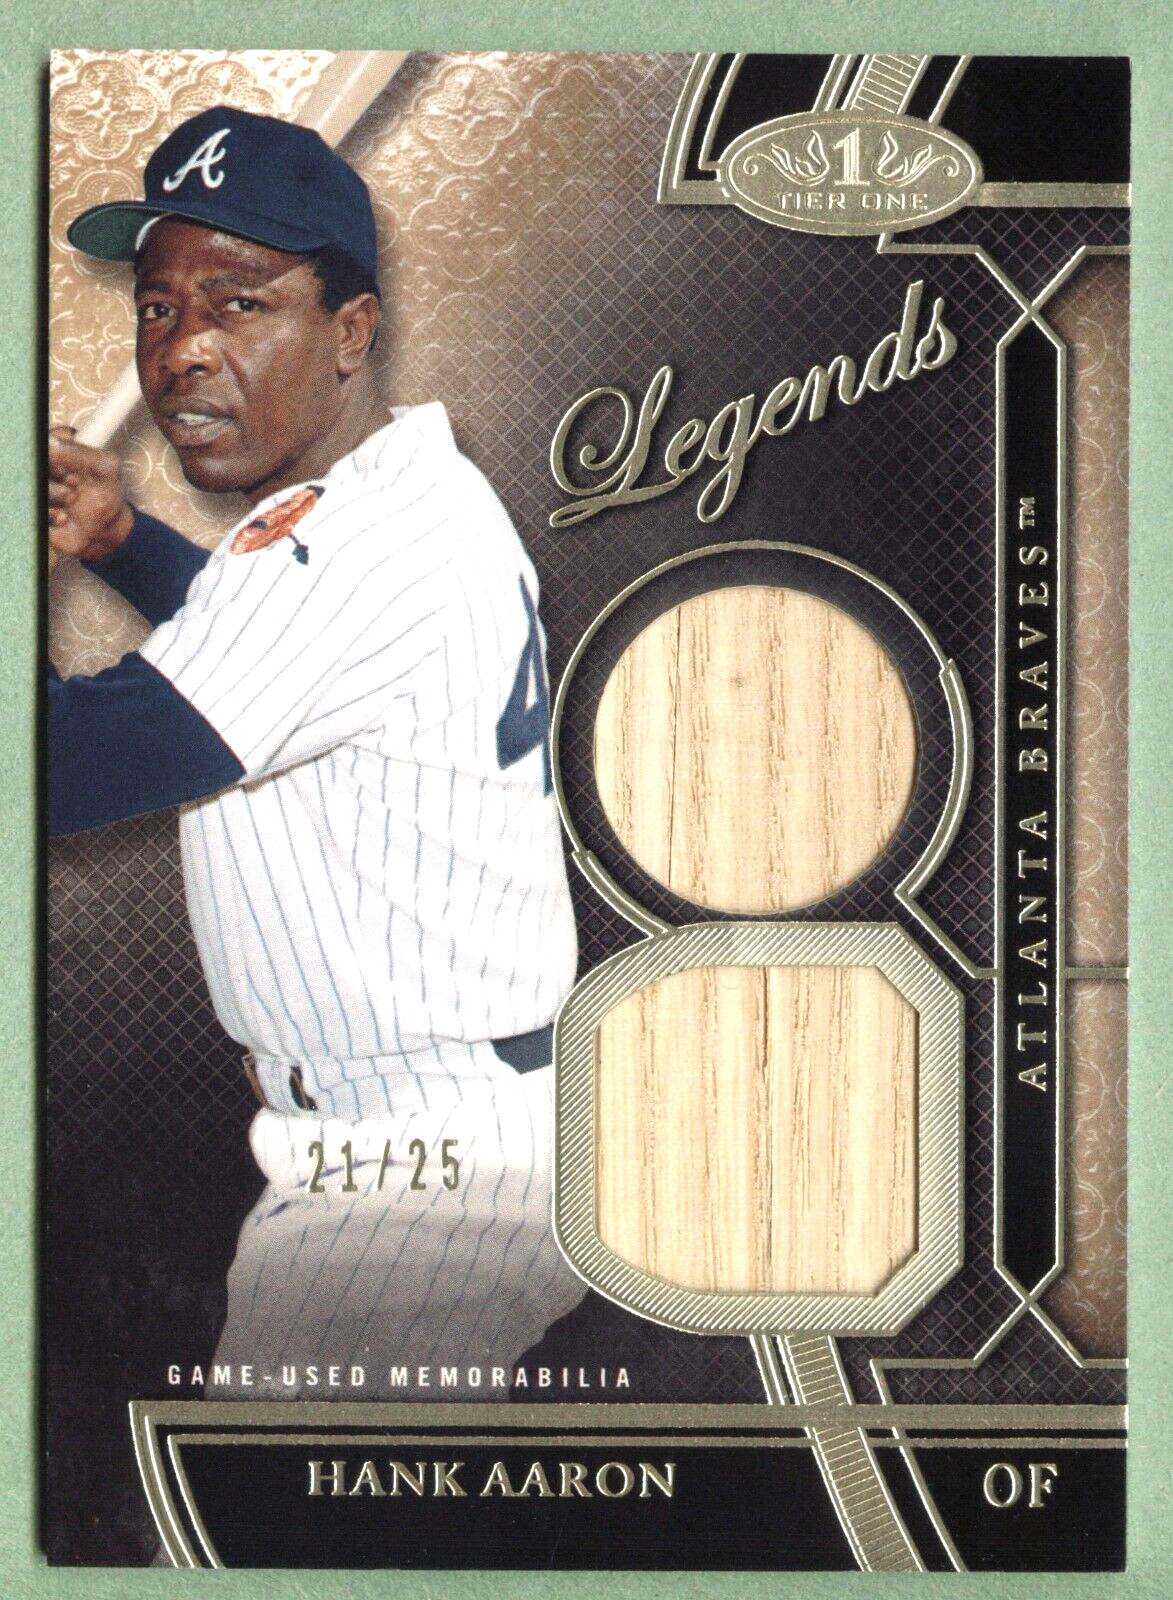 2015 TOPPS TIER ONE HANK AARON LEGENDS #21/25 GAME USED DUAL BAT RELIC BRAVES